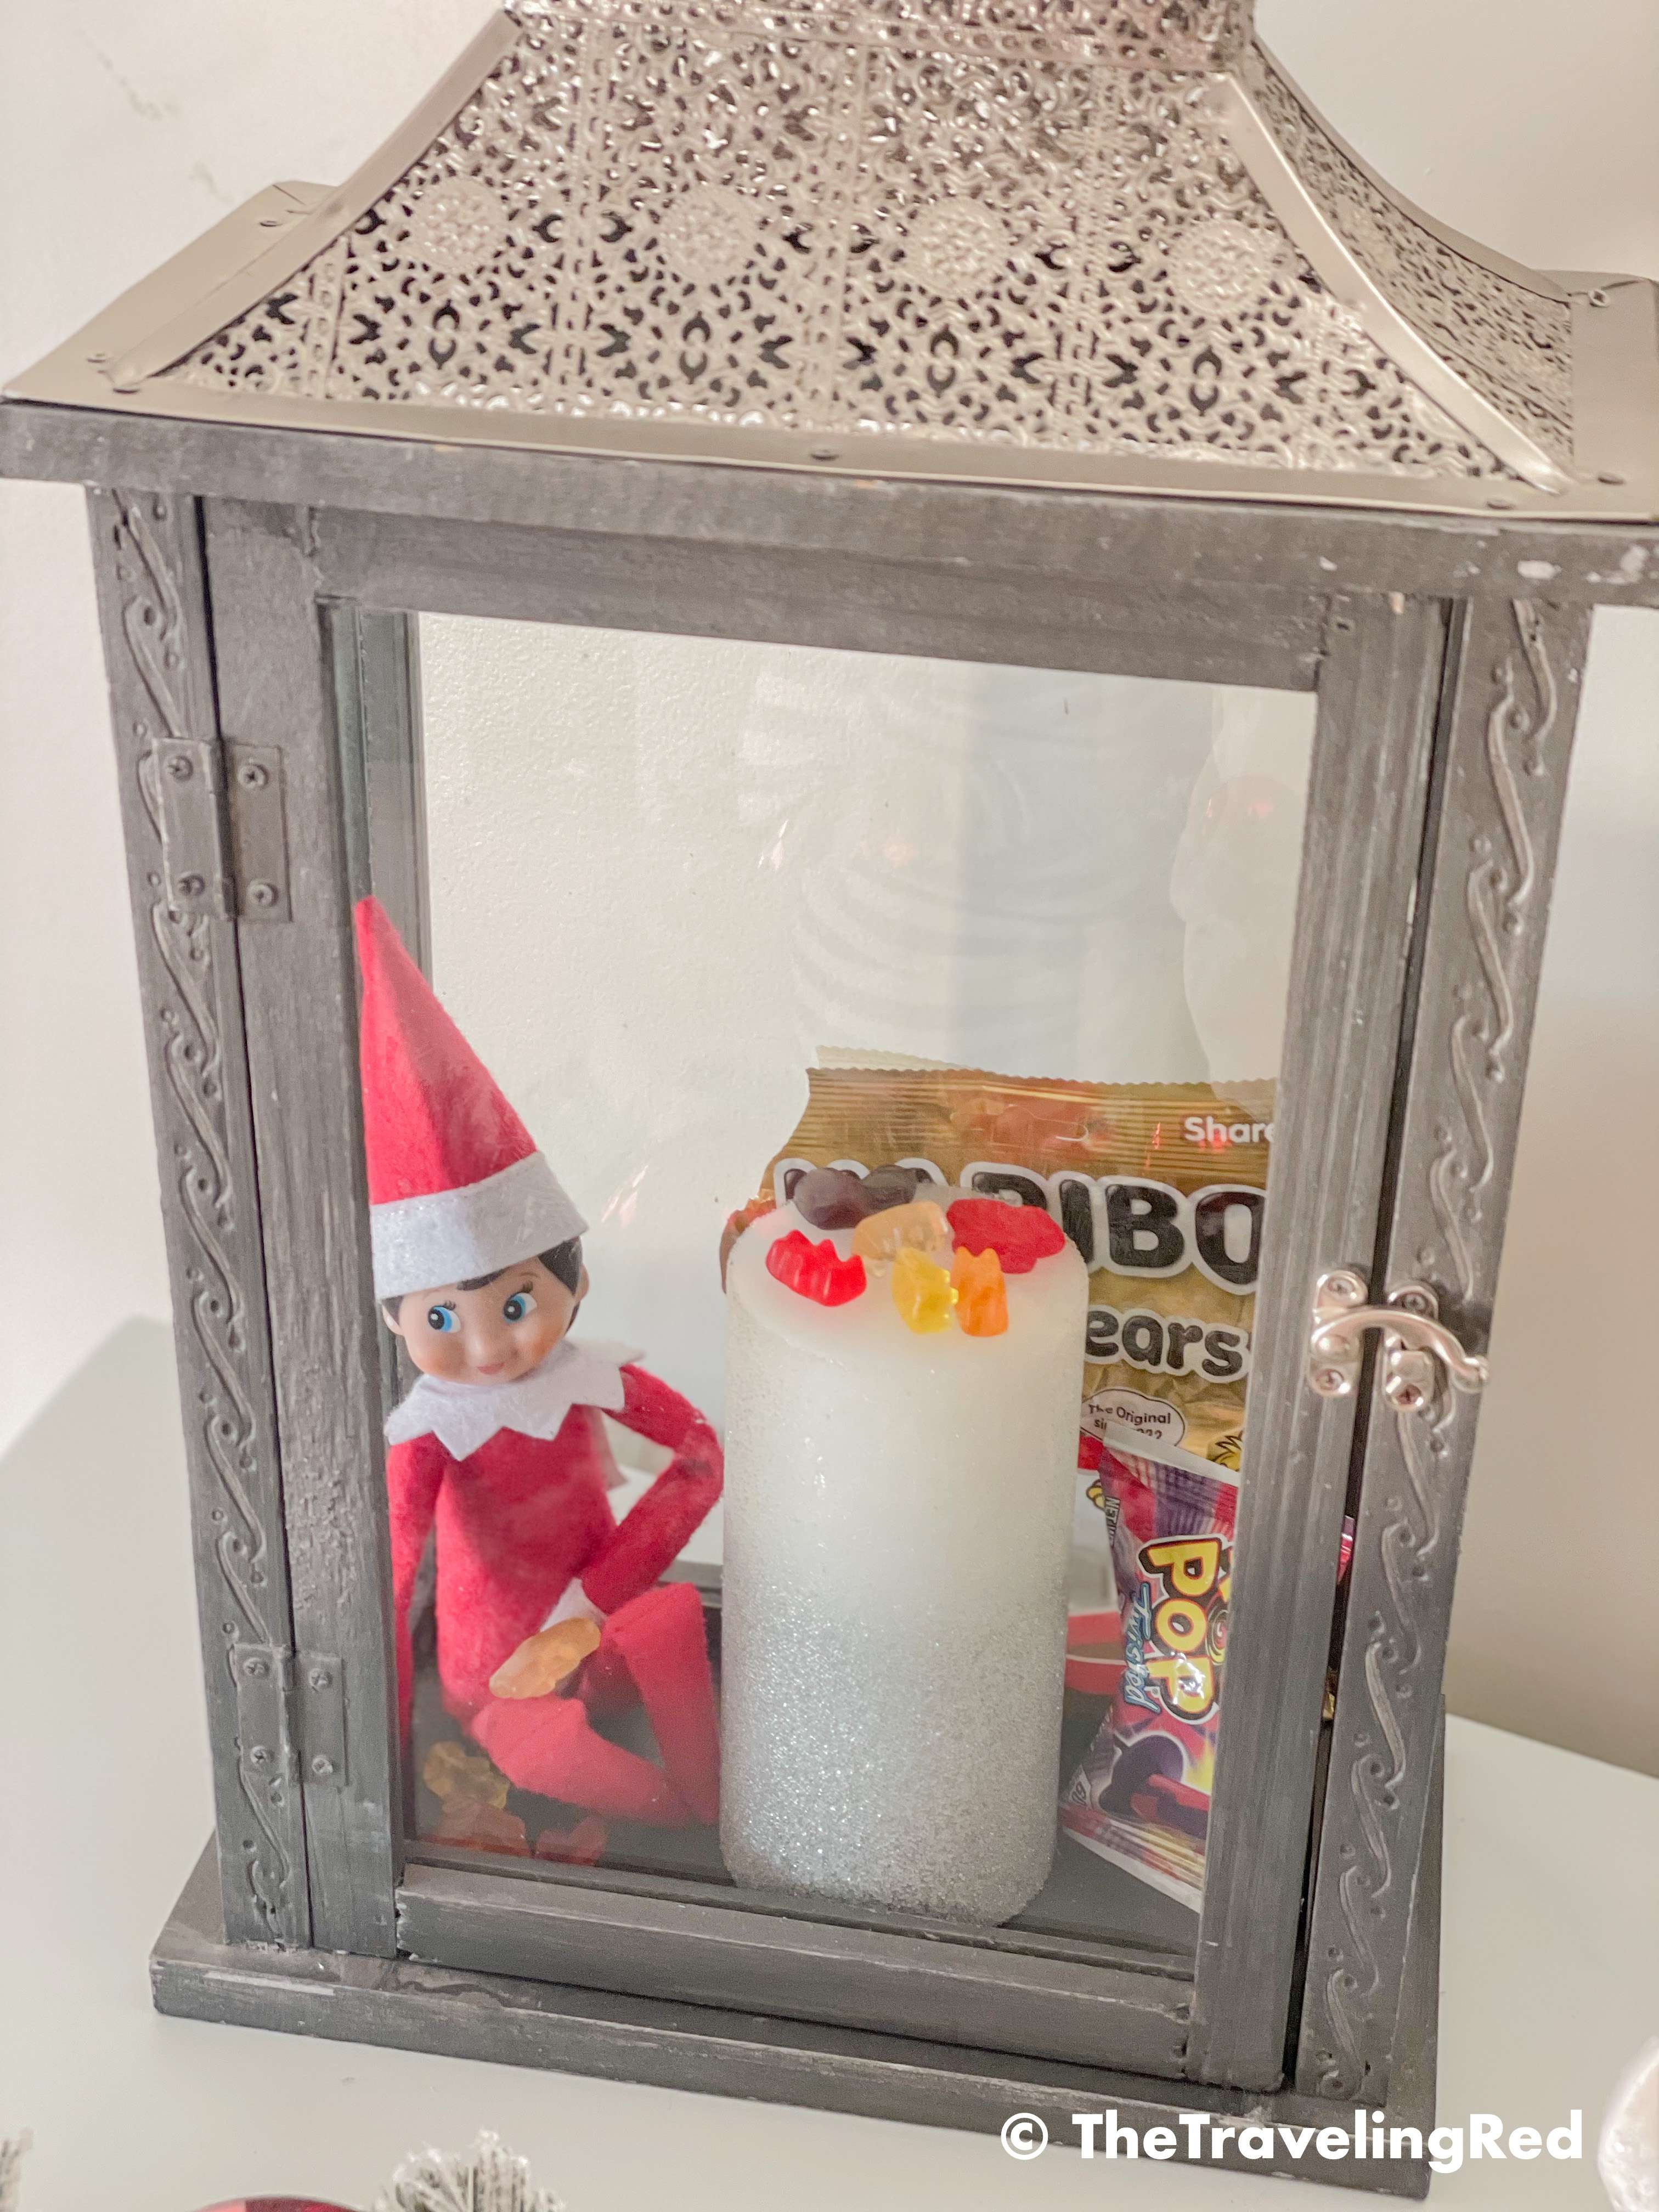 Naughty Elf on the shelf found some gummy bear candies and hid in a decorative lantern to eat them. Fun and easy elf on the shelf ideas for a naughty elf that are quick and easy using things you have at home.